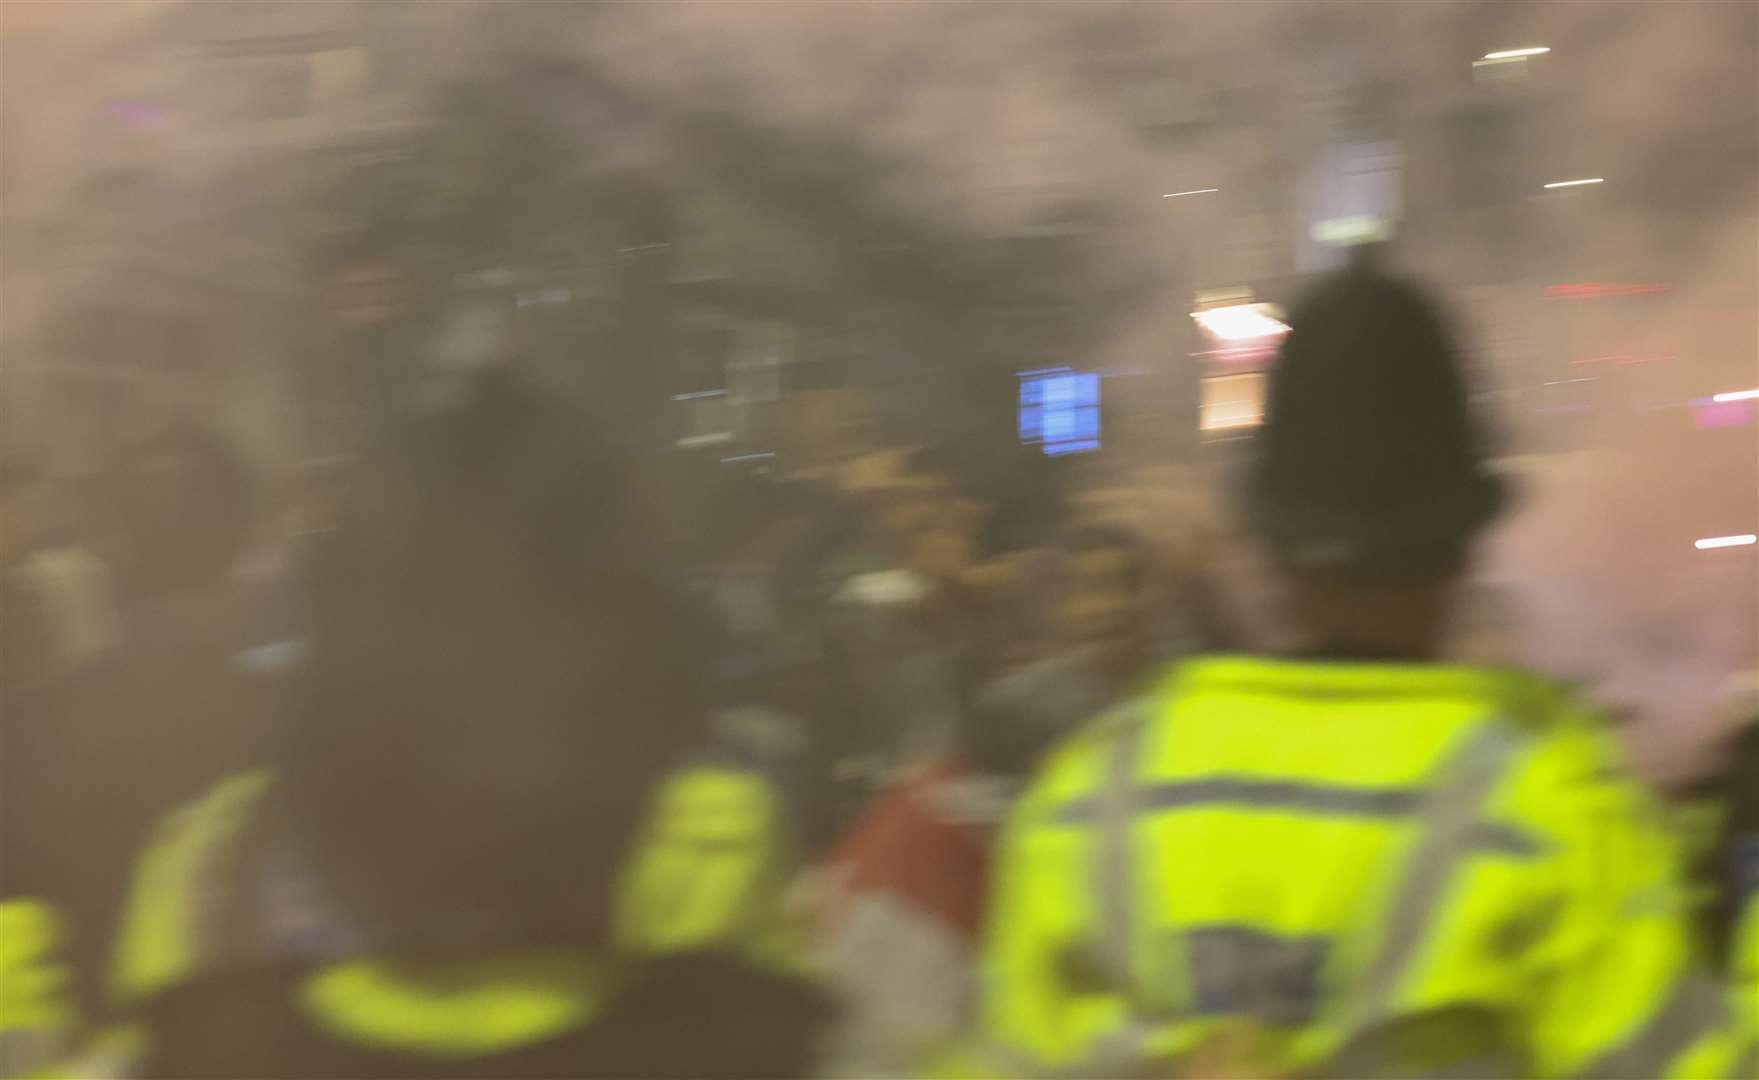 Bottles were thrown at the police Picture: UKNIP